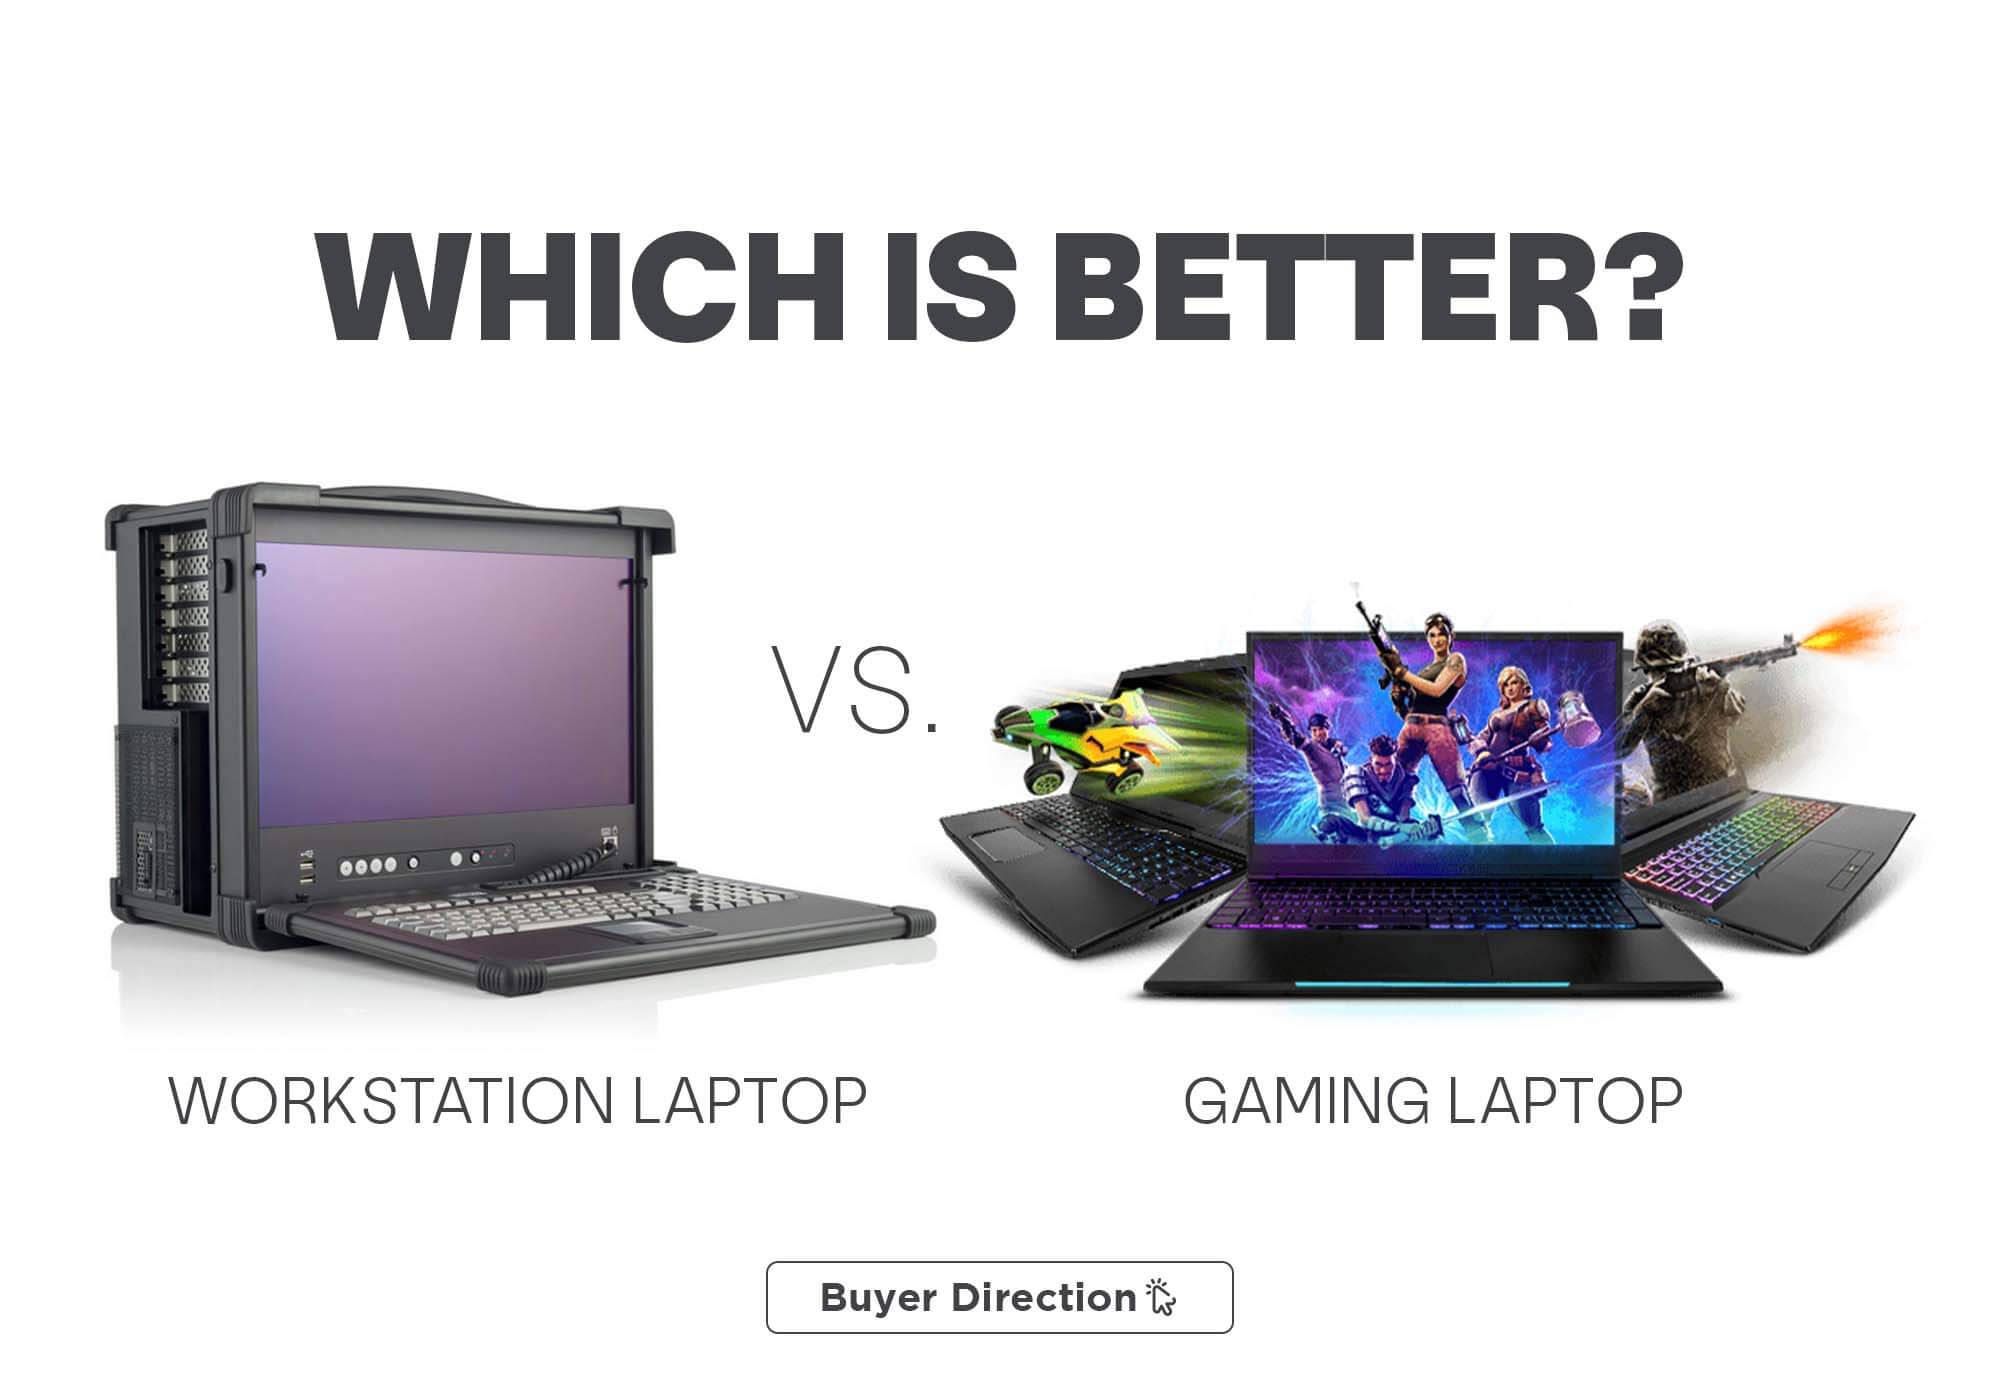 Workstation Laptop vs. Gaming Laptop: Which is better?